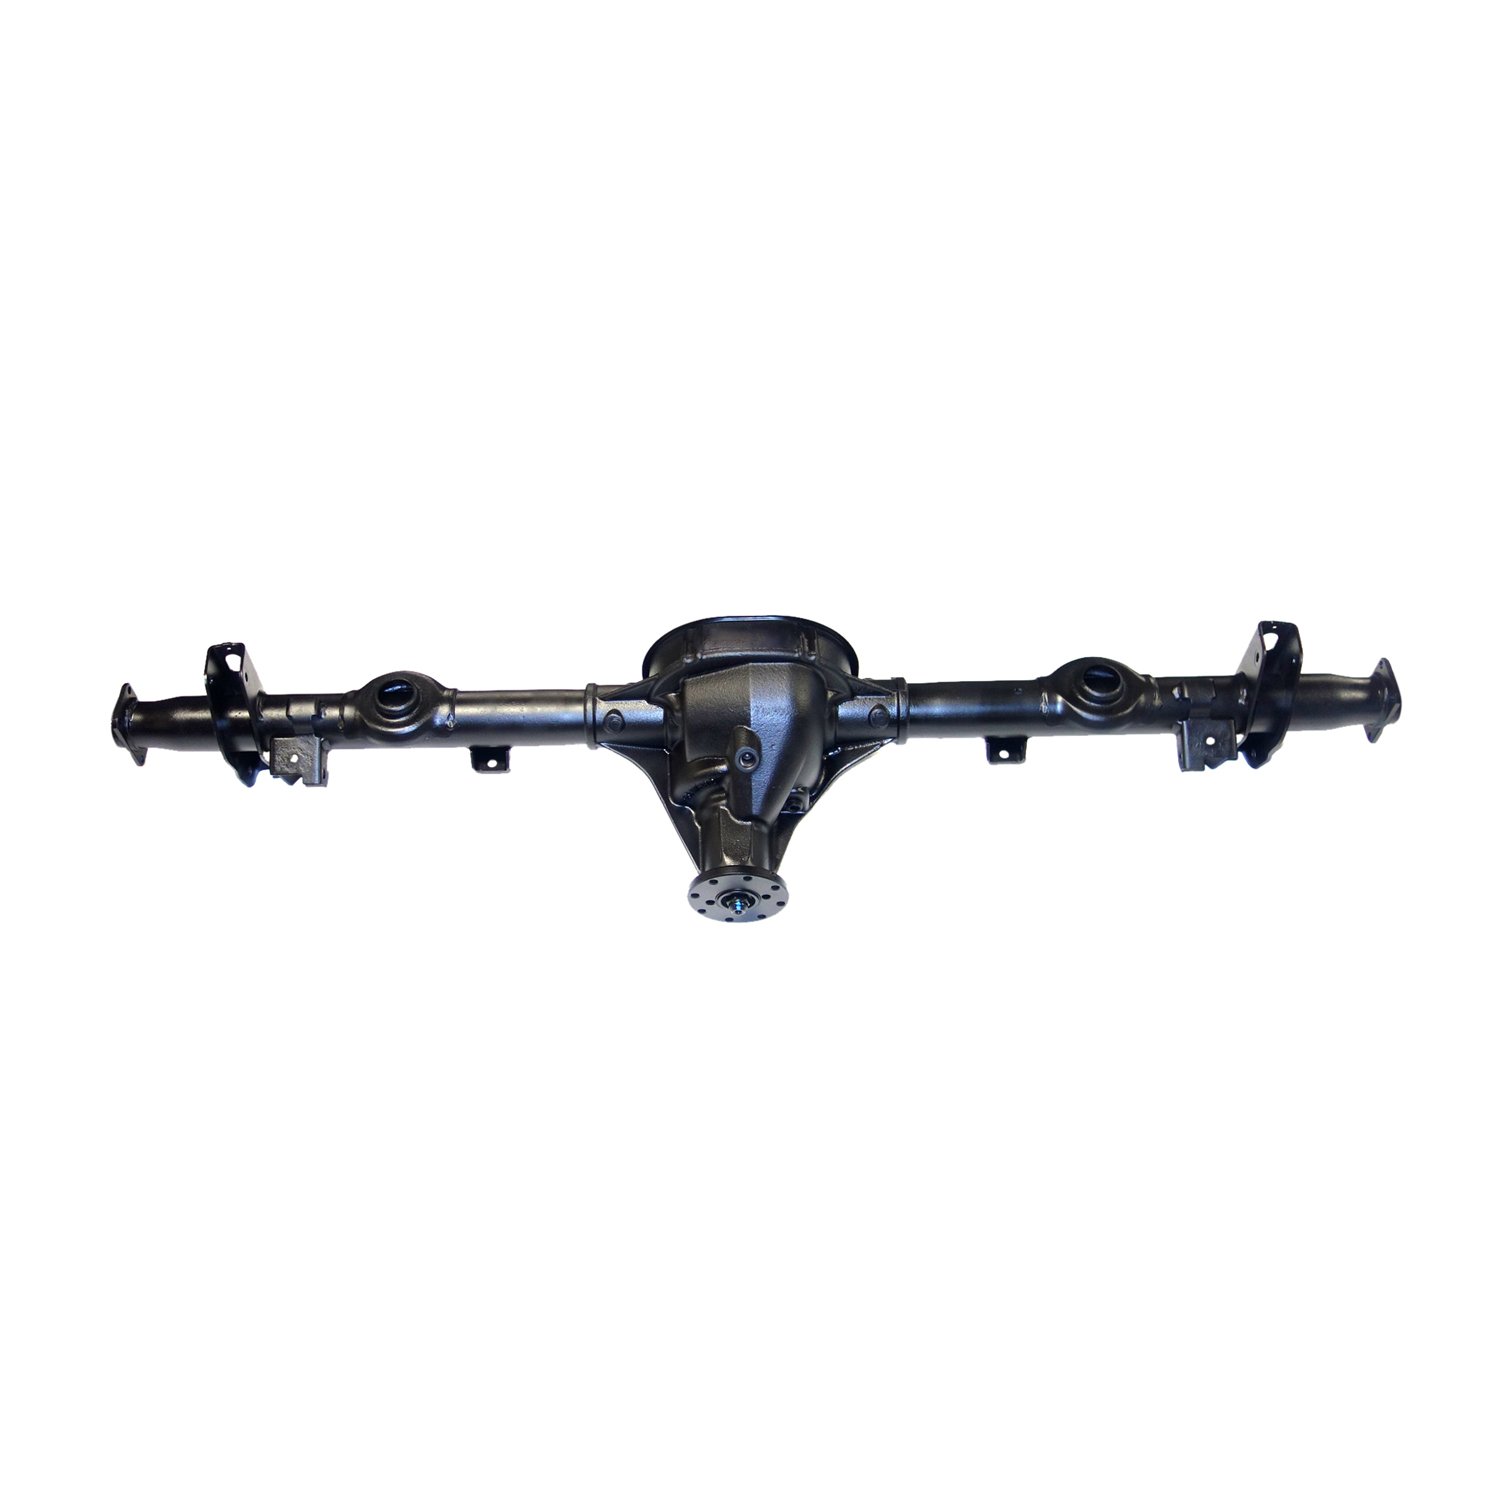 Remanufactured Axle Assy 8.8" 01-02 Crown Vic, W/O ABS W/H&ling Package, 3.27 Raito, Posi